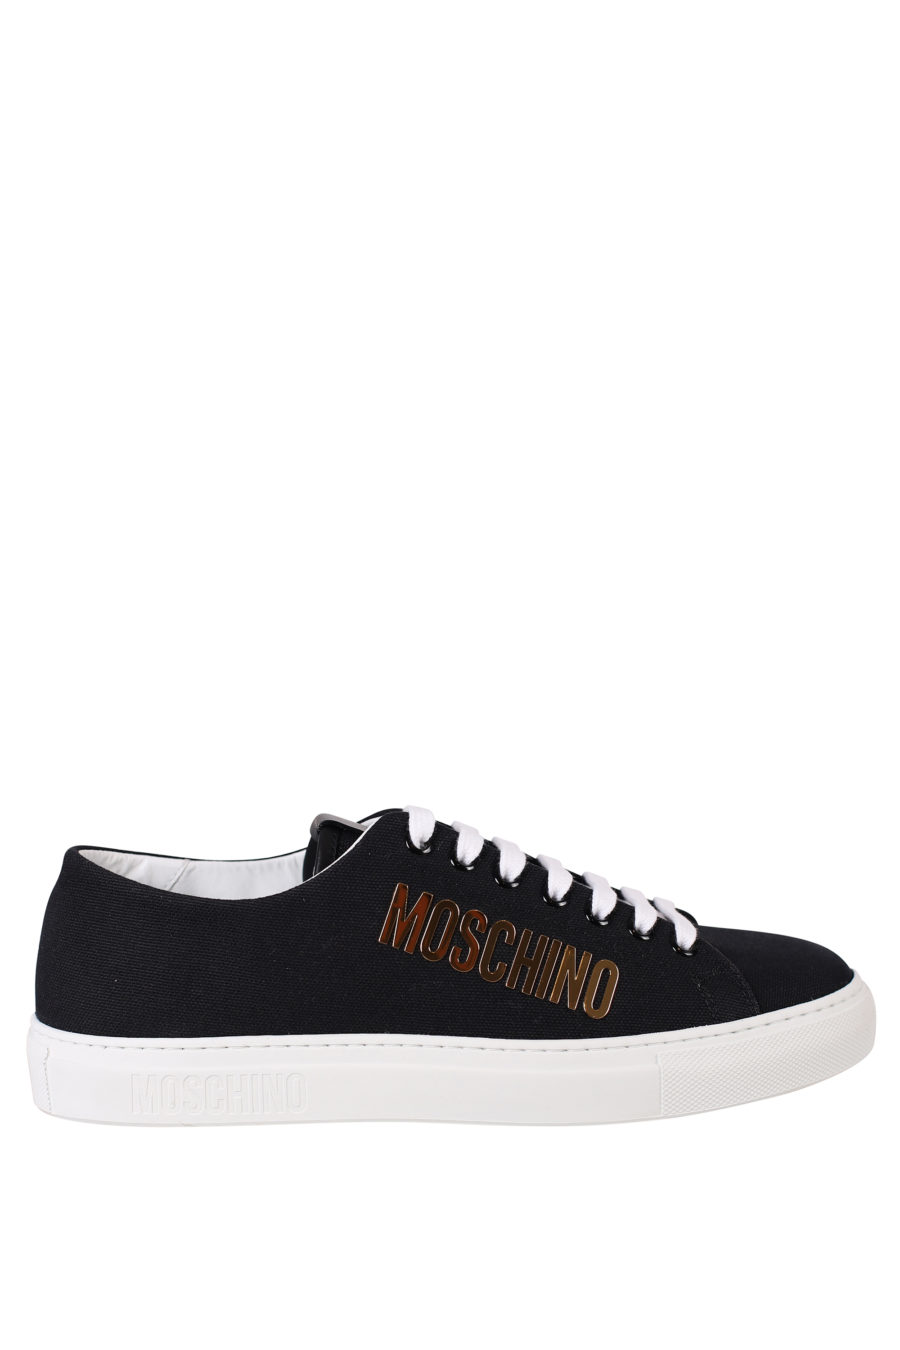 Black trainers with white sole and gold logo - IMG 0370